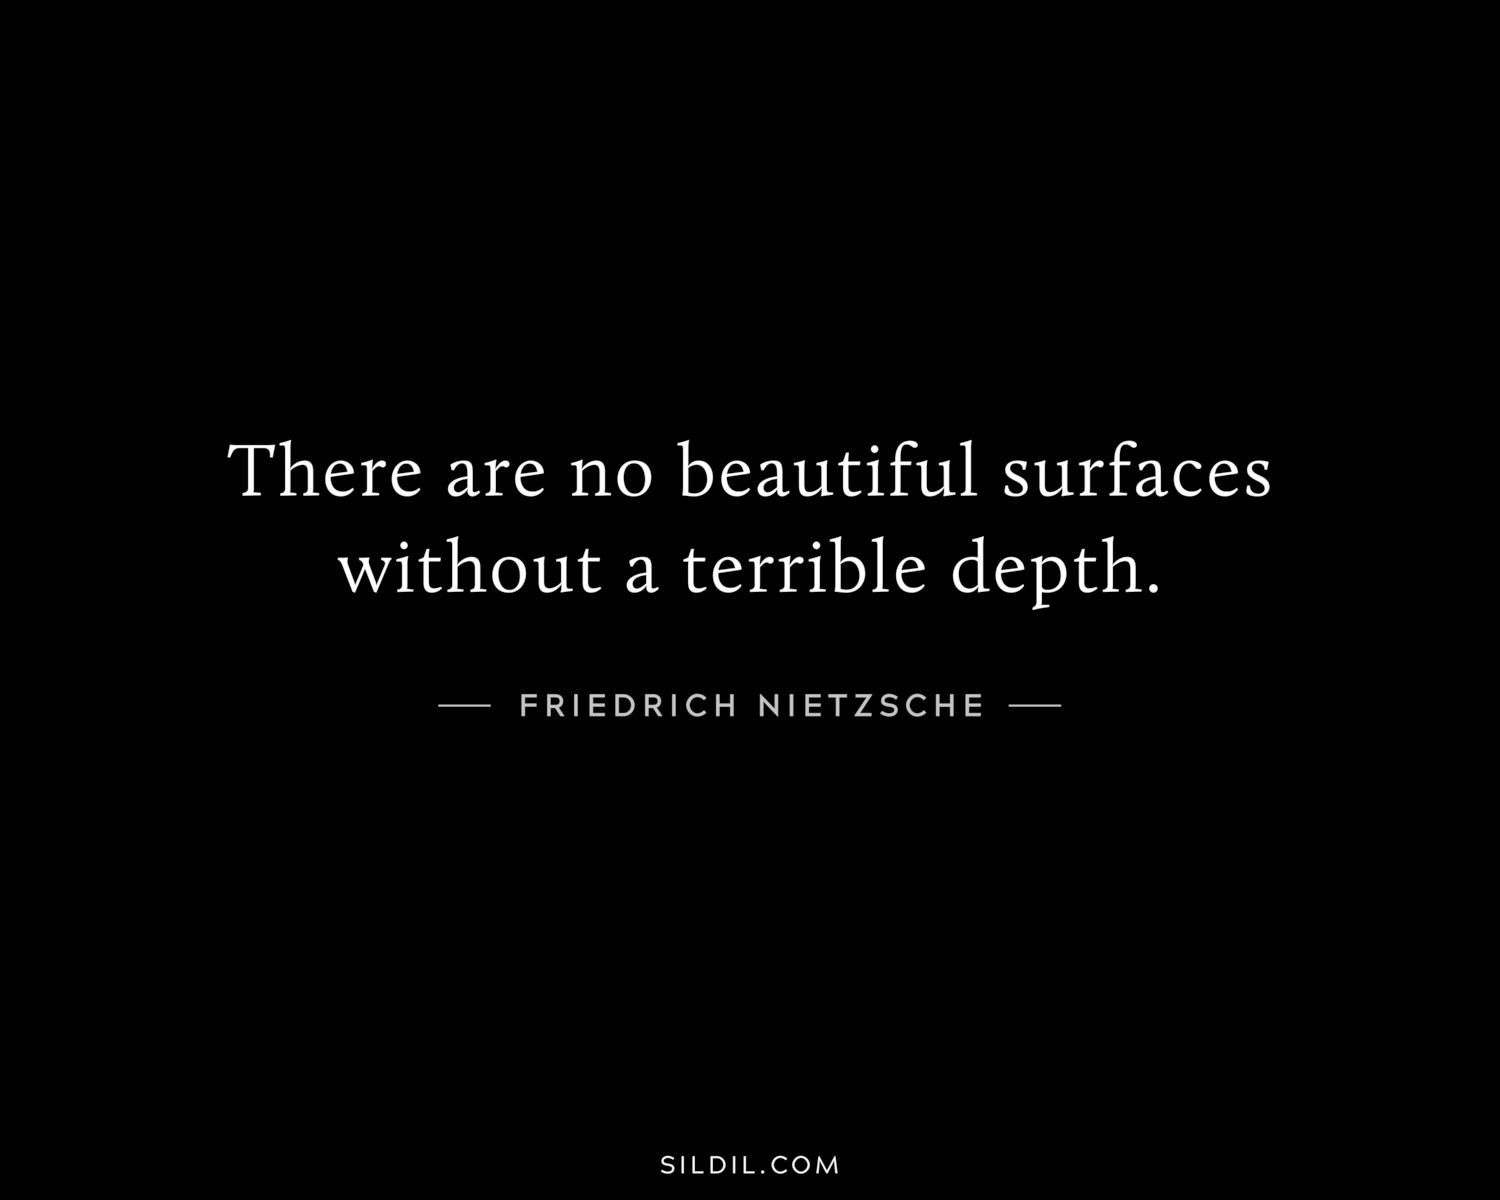 There are no beautiful surfaces without a terrible depth.